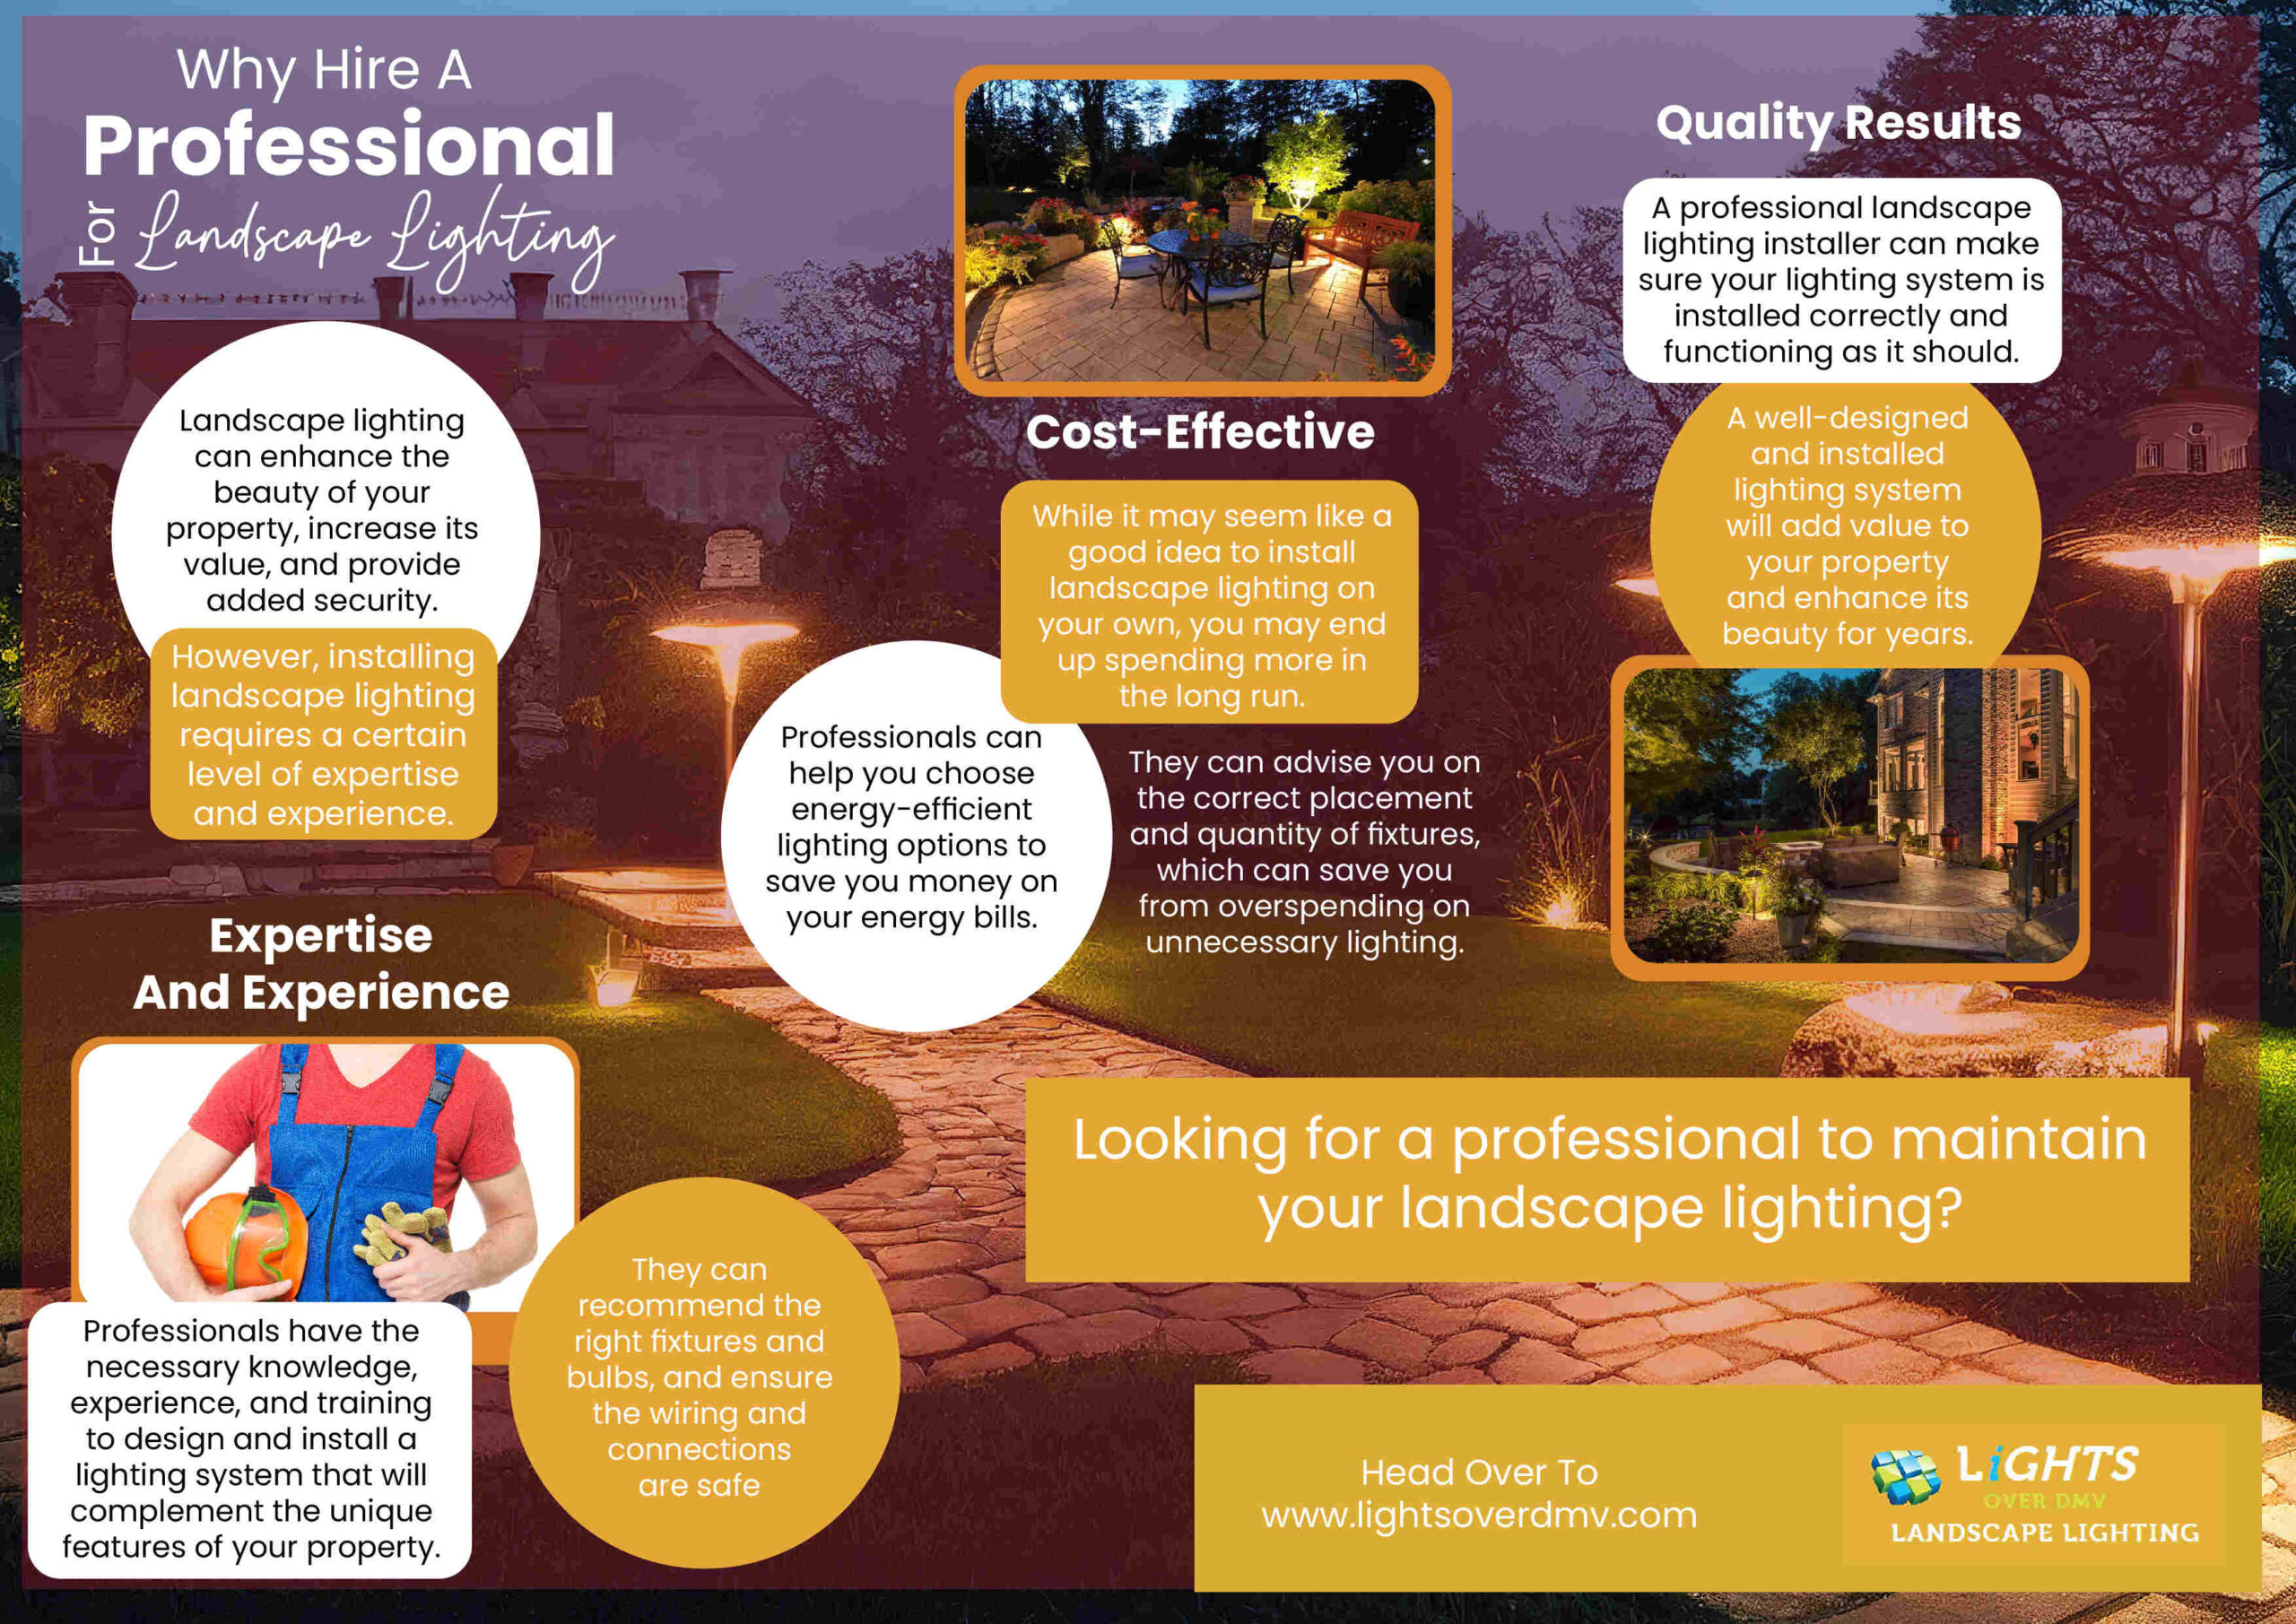 Why Hire A Professional For Landscape Lighting